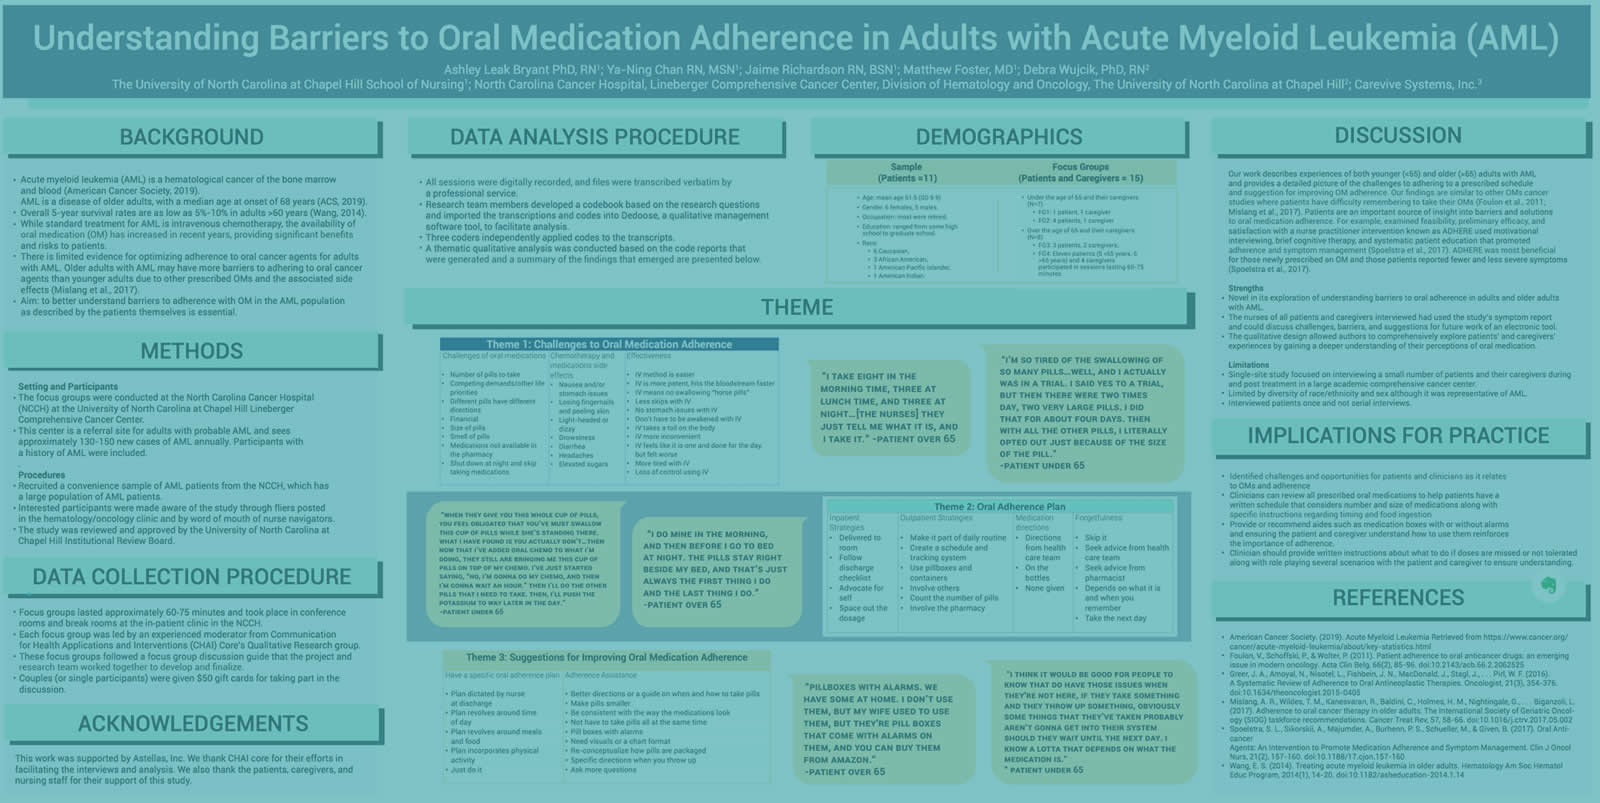 Understanding Barriers to Oral Medication Adherence in Adults with Acute Myeloid Leukemia (AML)